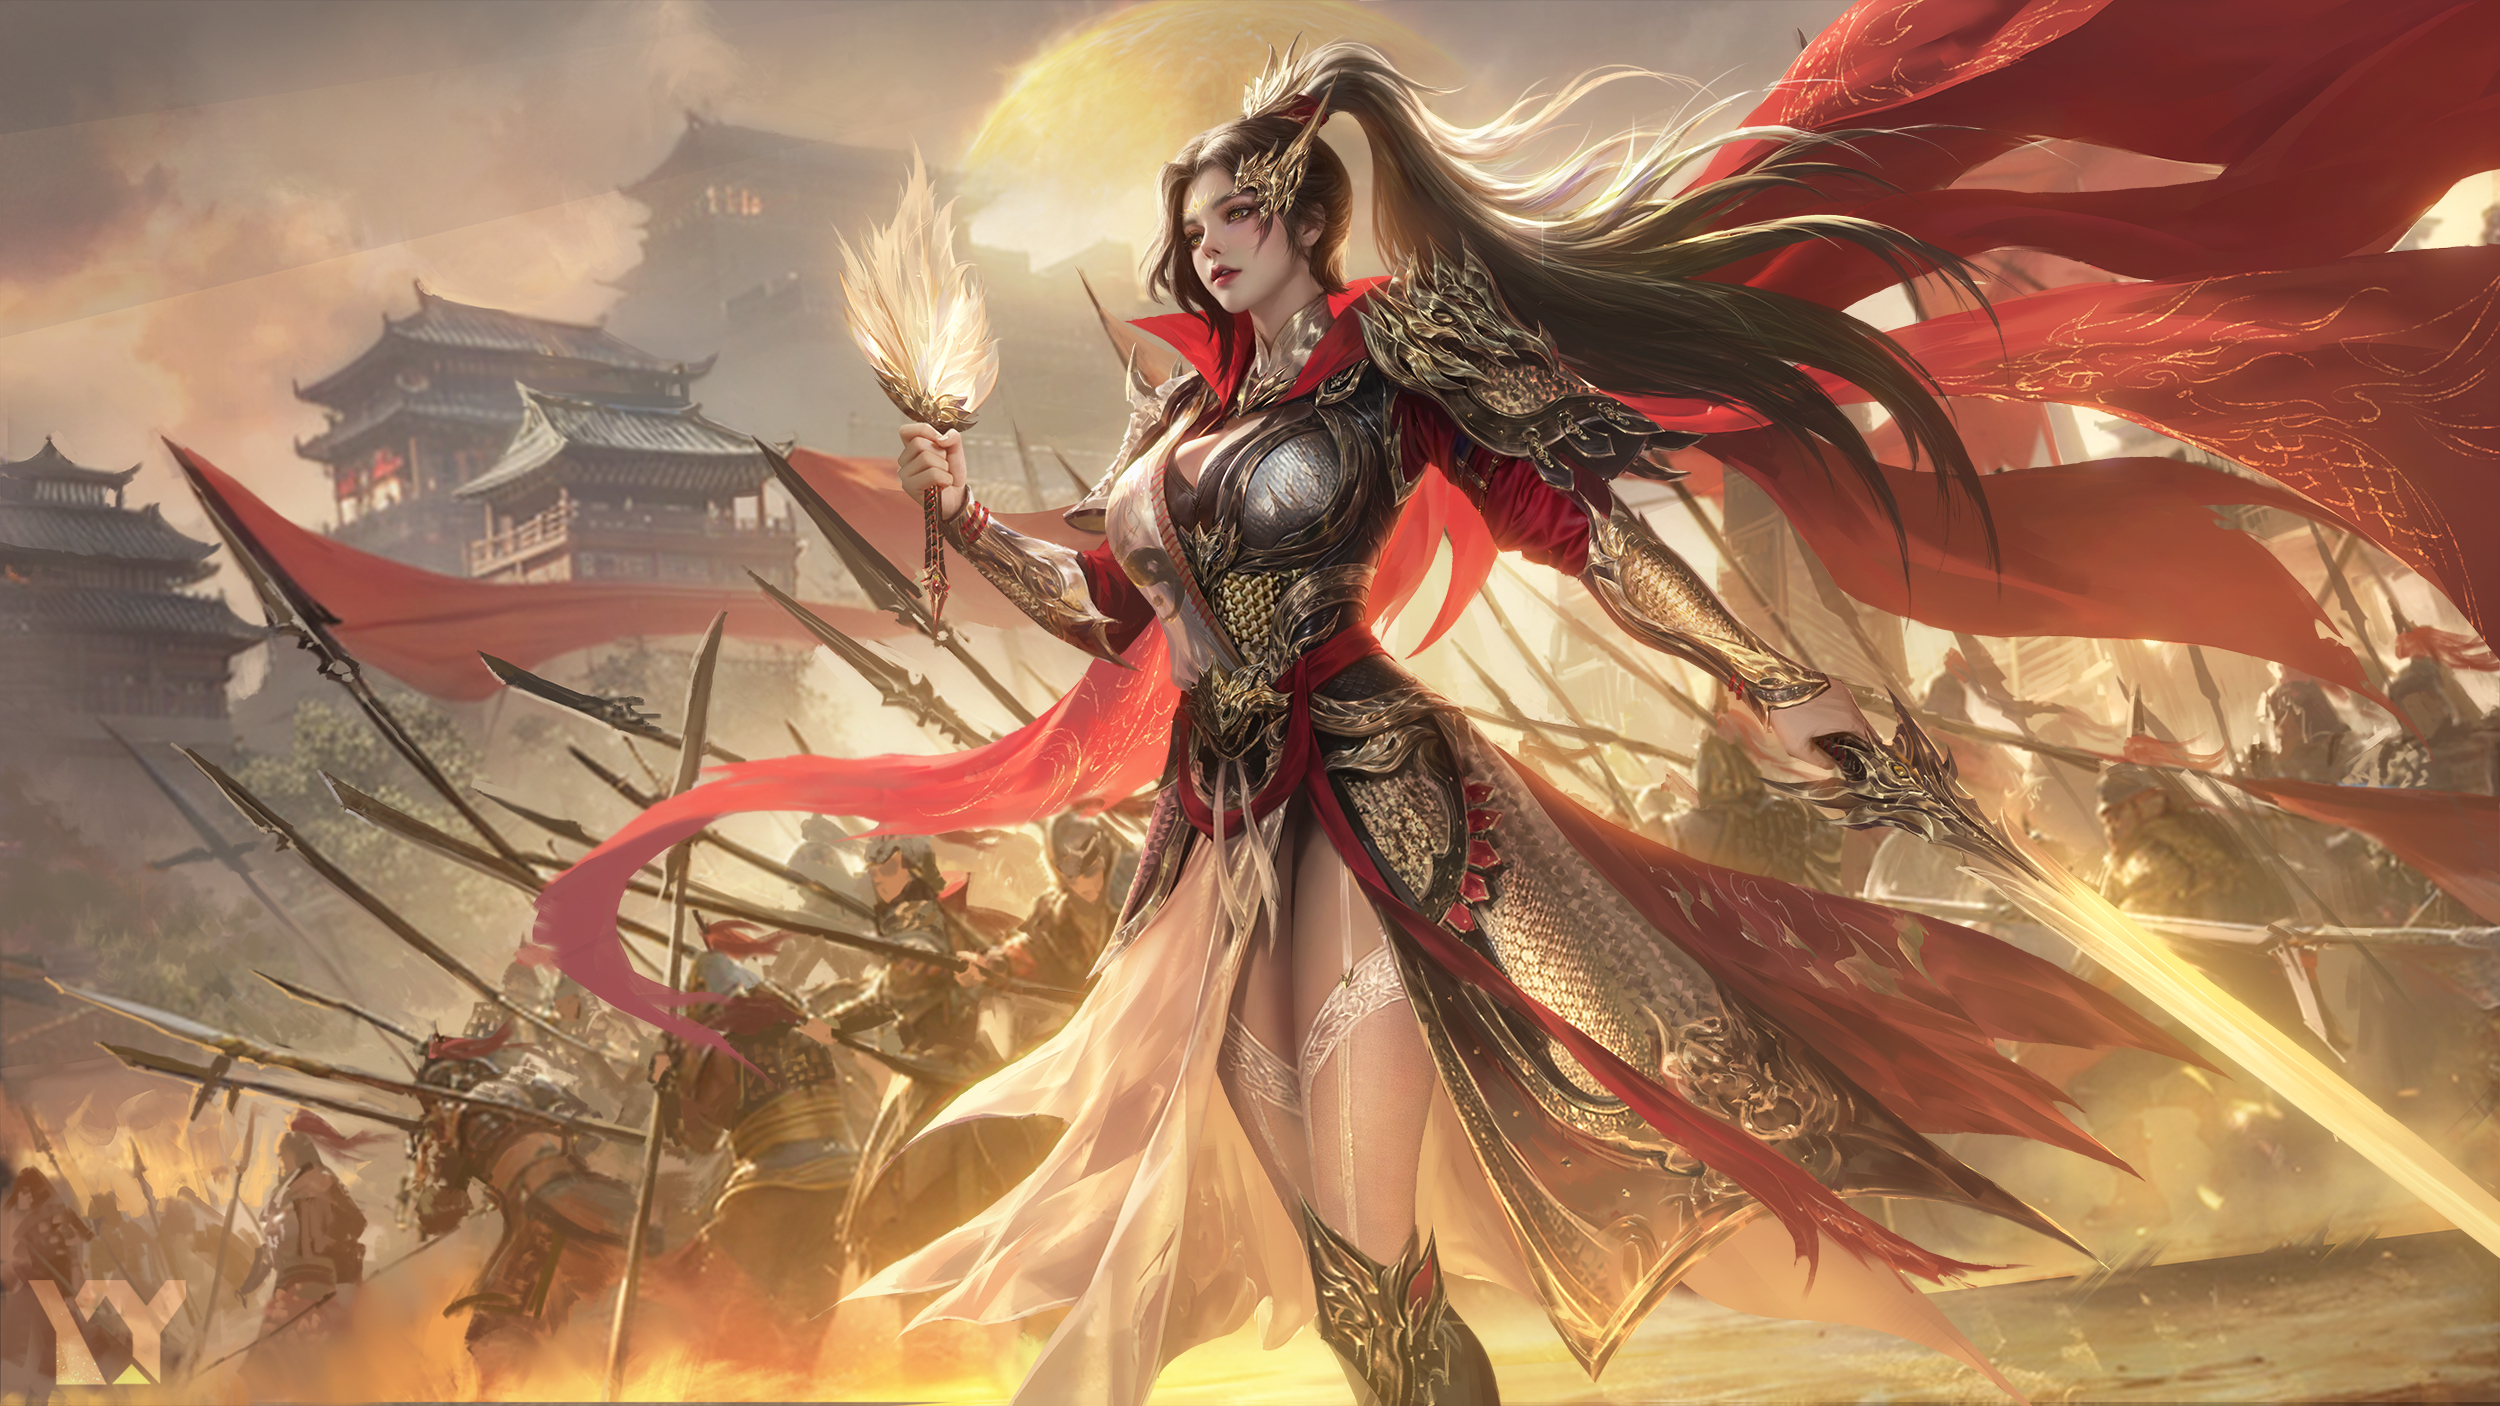 General 2500x1406 character design  warrior women women outdoors ponytail long hair sword weapon armor army looking away Asian